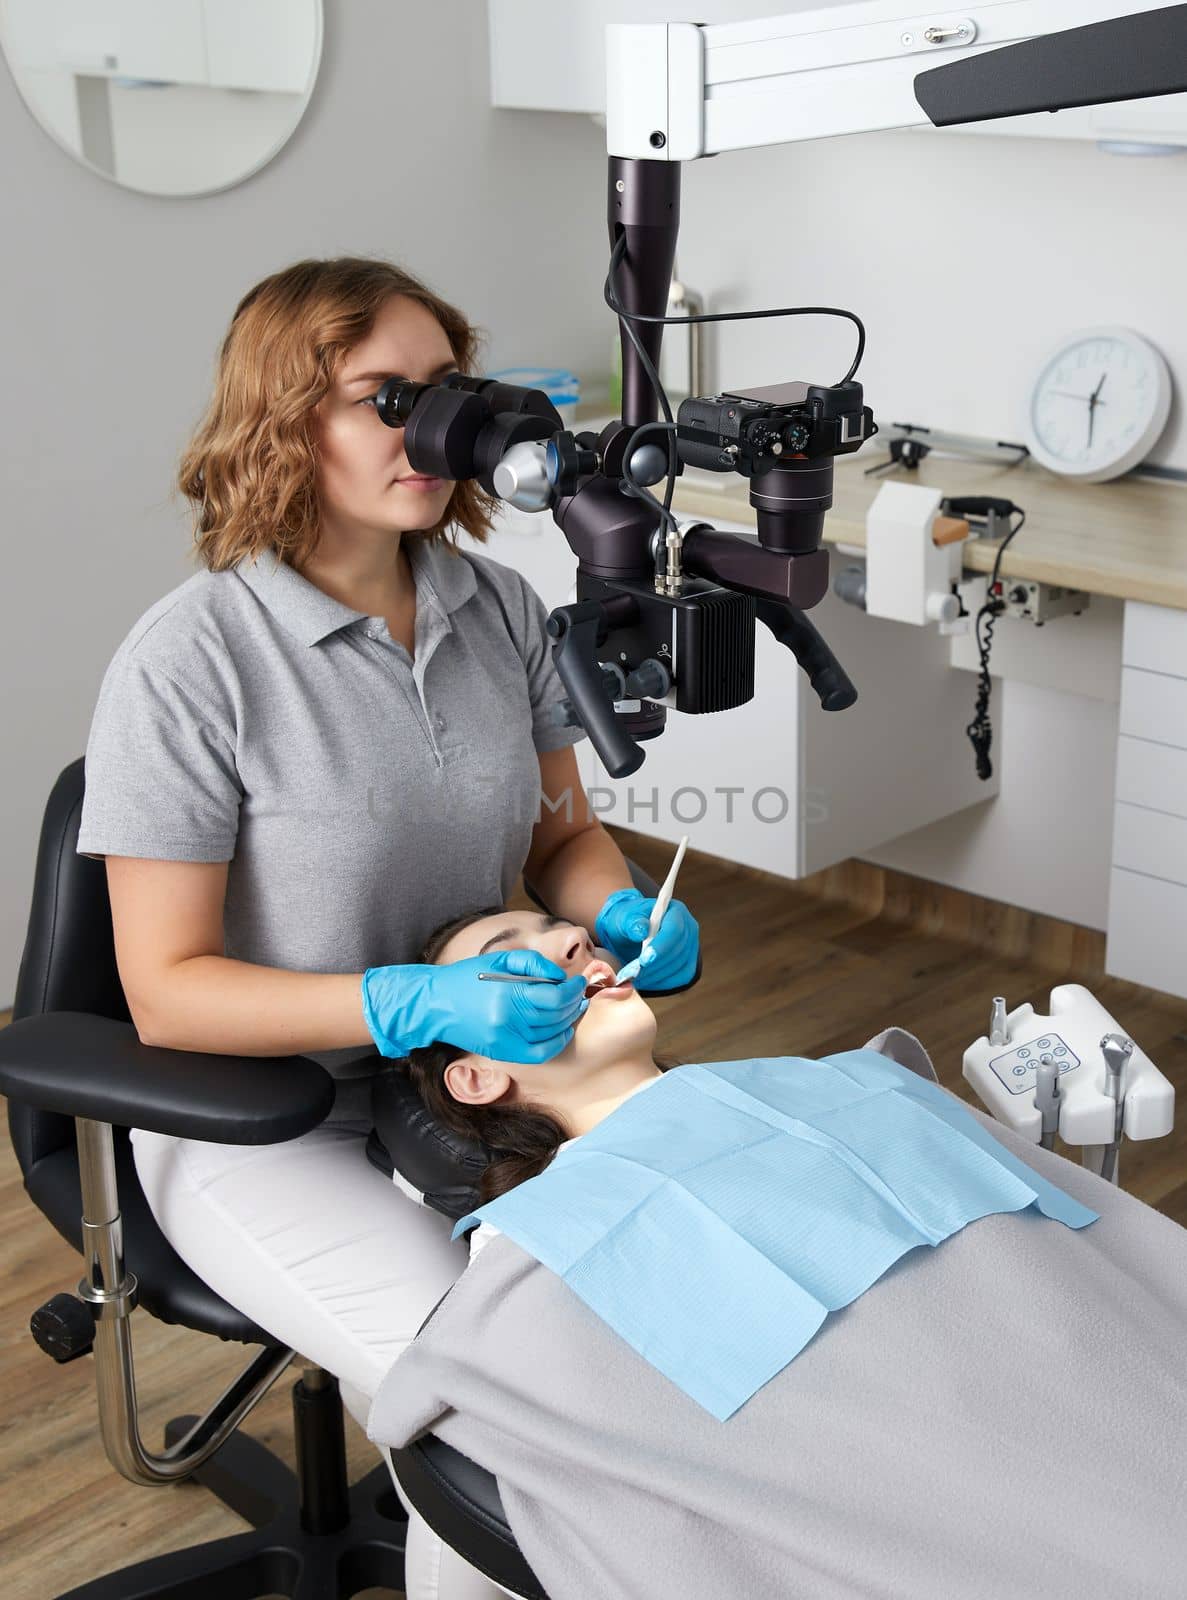 Female dentist with microscope treating patient teeth at dental clinic office. Medicine, dentistry and health care concept. by Mariakray